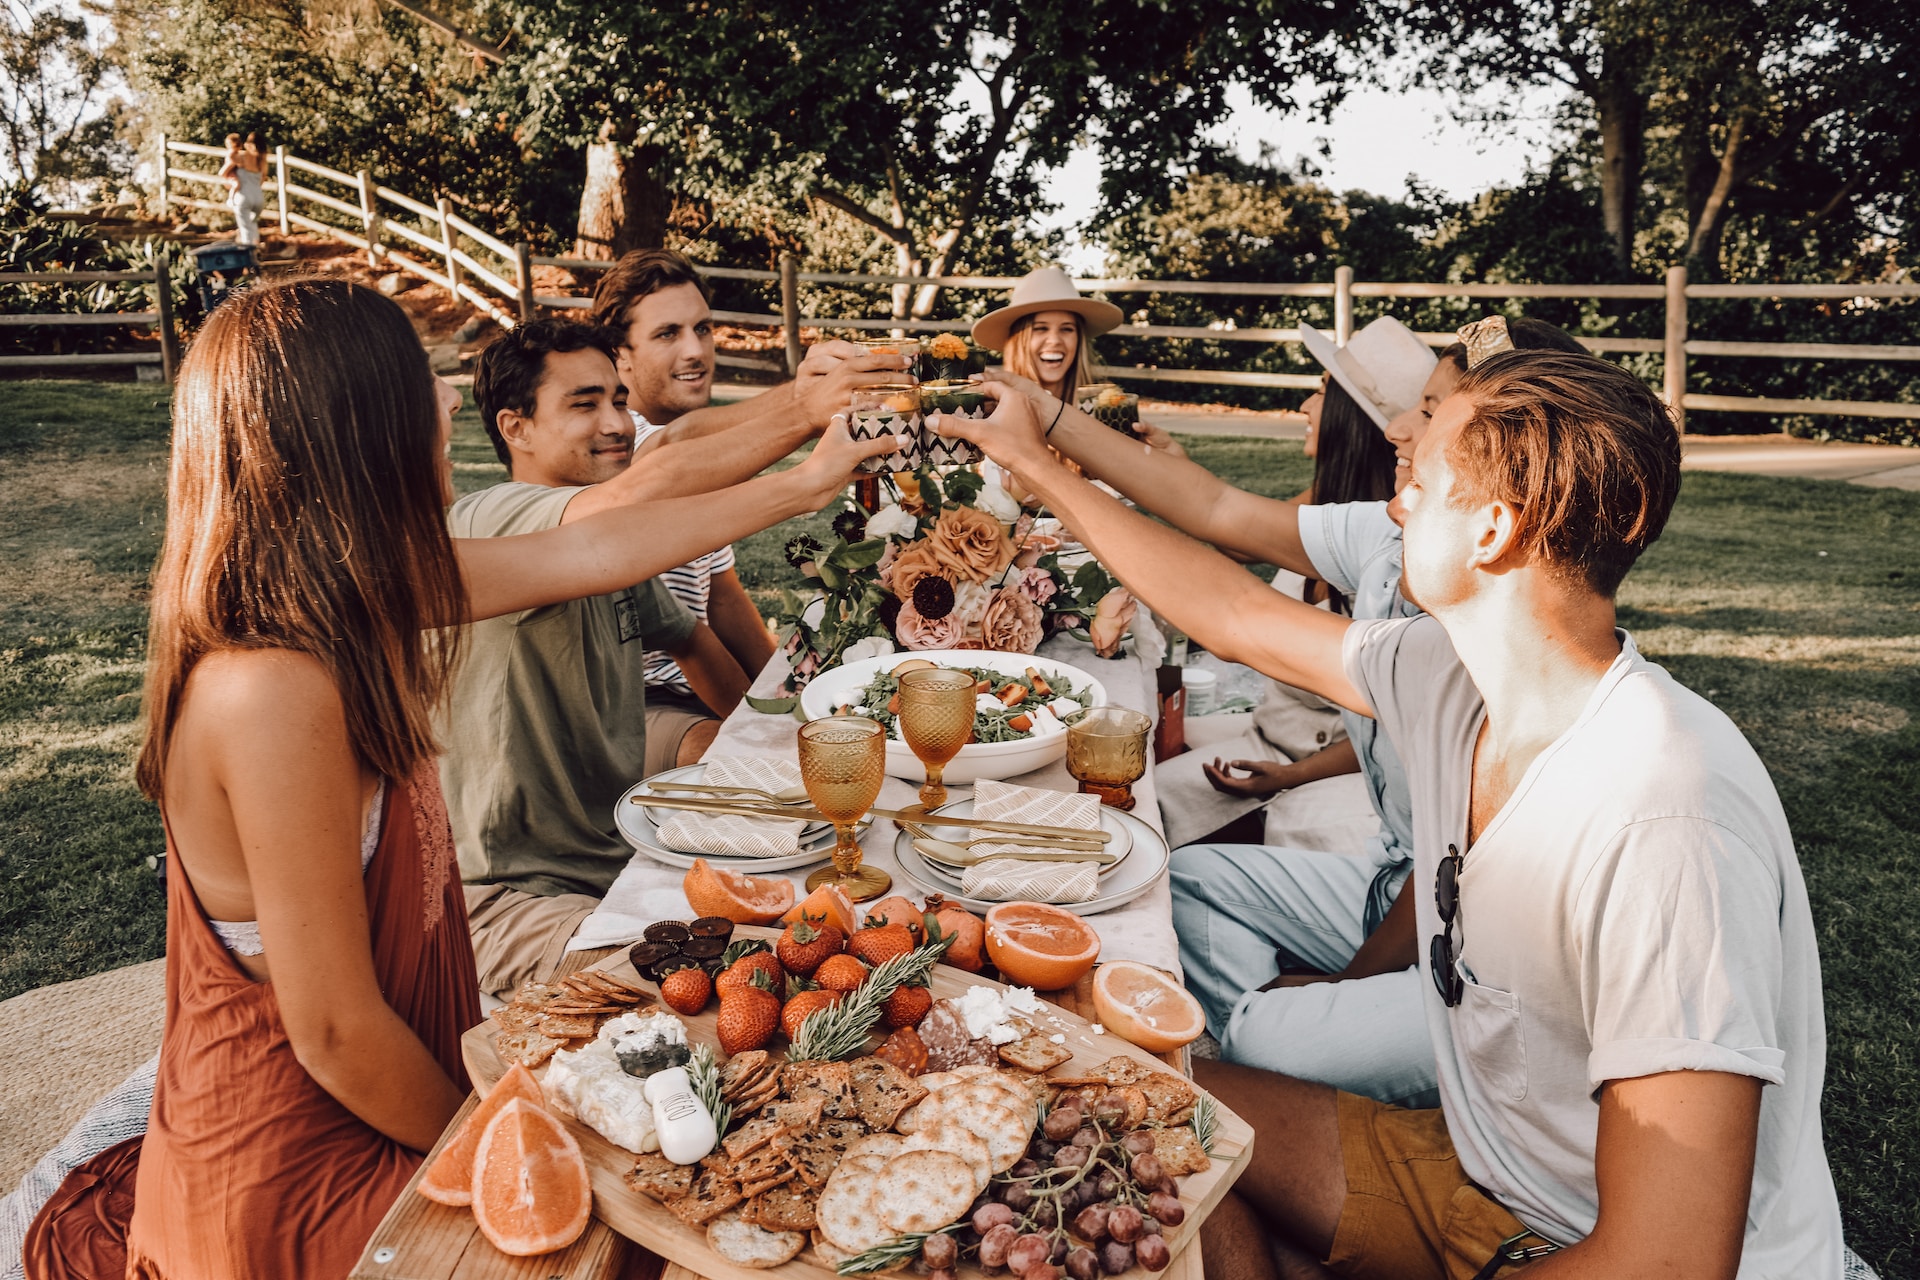 Group of people having a toast around a table with a spread of food.